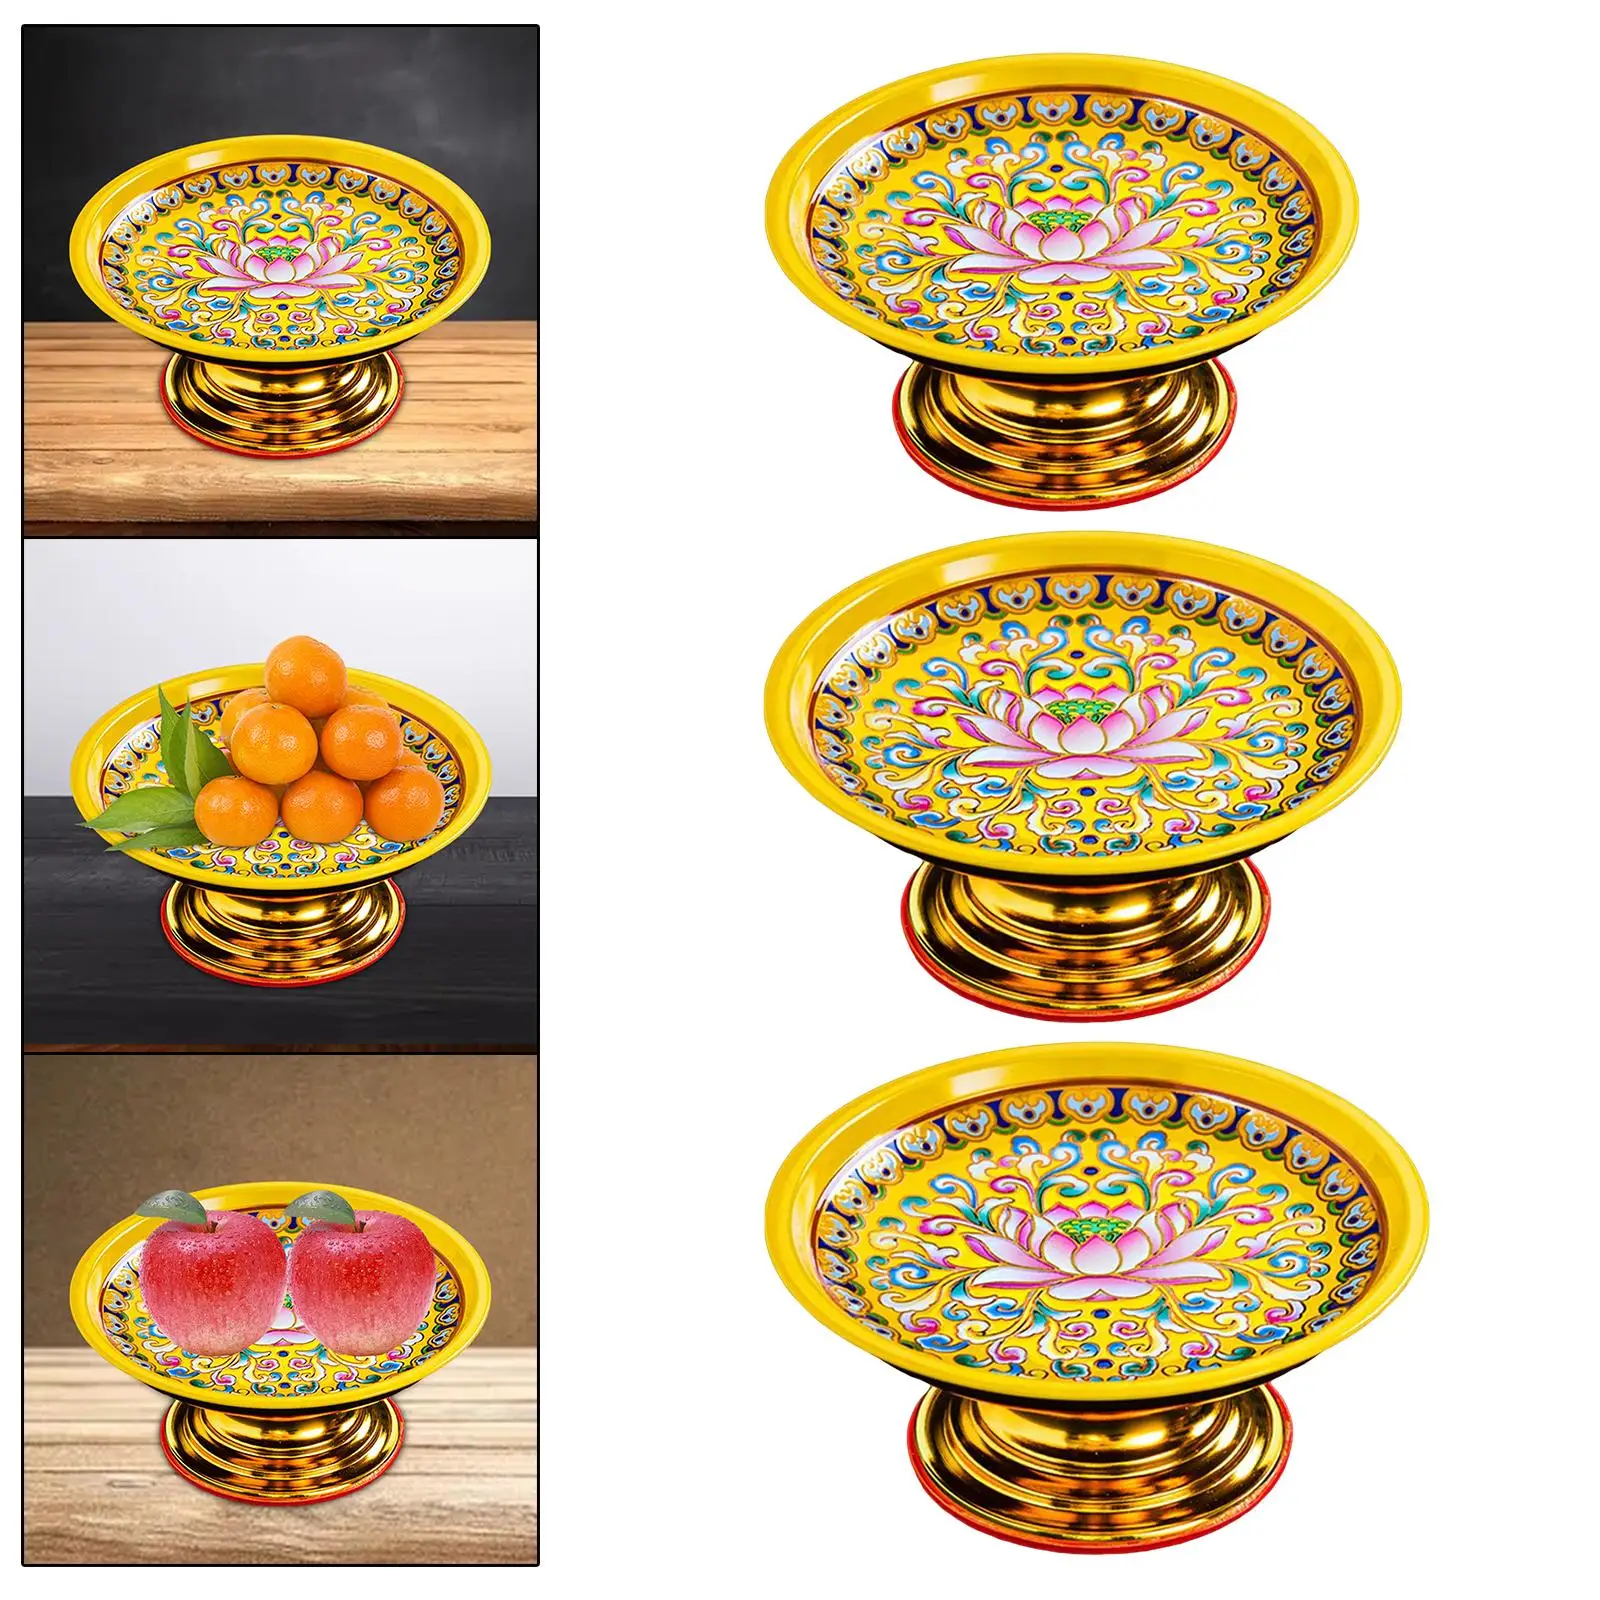 Temple Serving Tray Desktop Organizer Easy to Fill Counter Storage Tray Alloy Shinny Look Buddhist Plate Offering Bowl